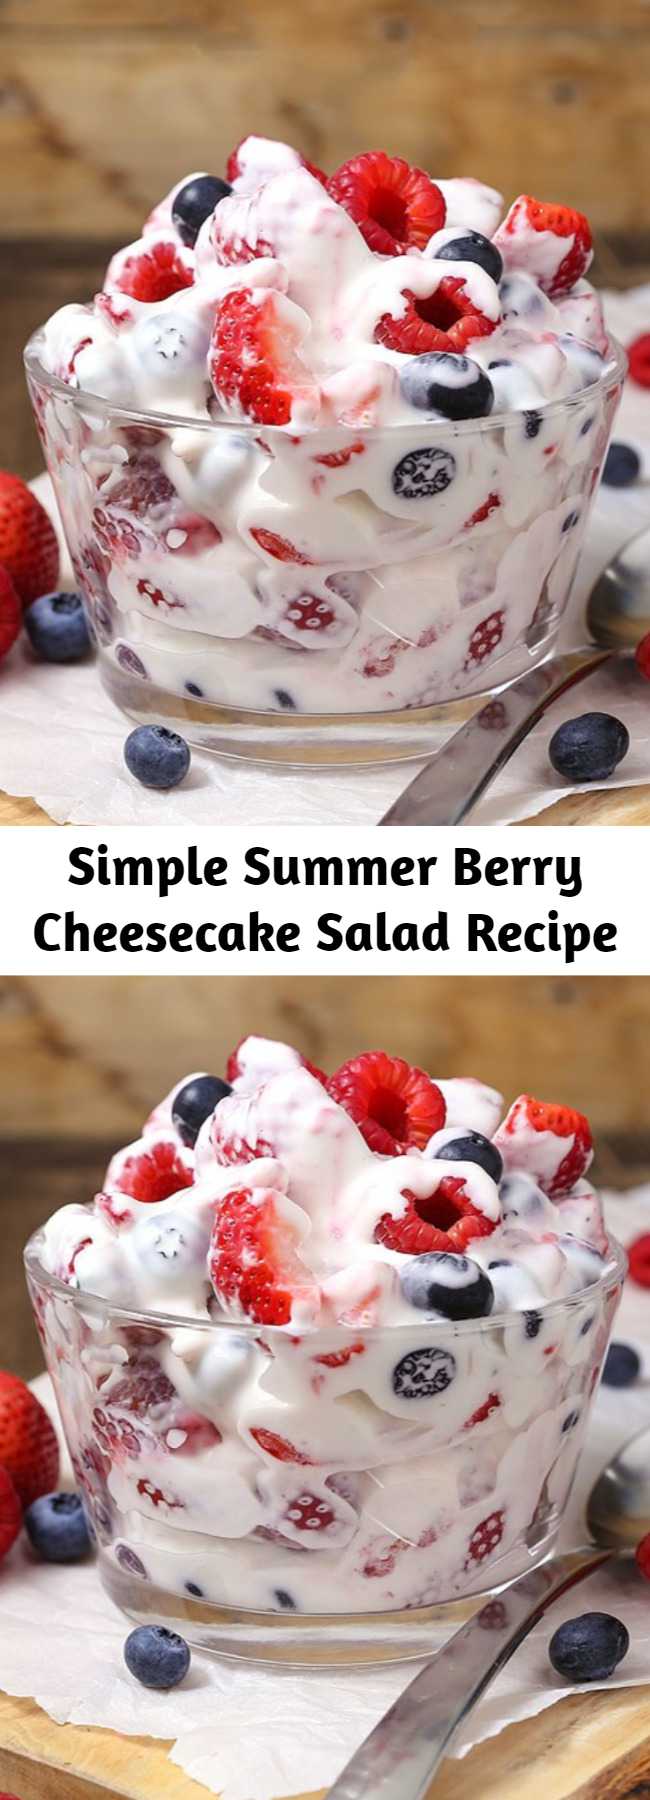 Simple Summer Berry Cheesecake Salad Recipe - This simple Summer Berry Cheesecake Salad recipe comes together with just 5 ingredients. Rich and creamy cheesecake filling is folded into your favorite berries to create the most amazing fruit salad ever! Your family will go nuts over it. #cheesecakesalad #summersidedish